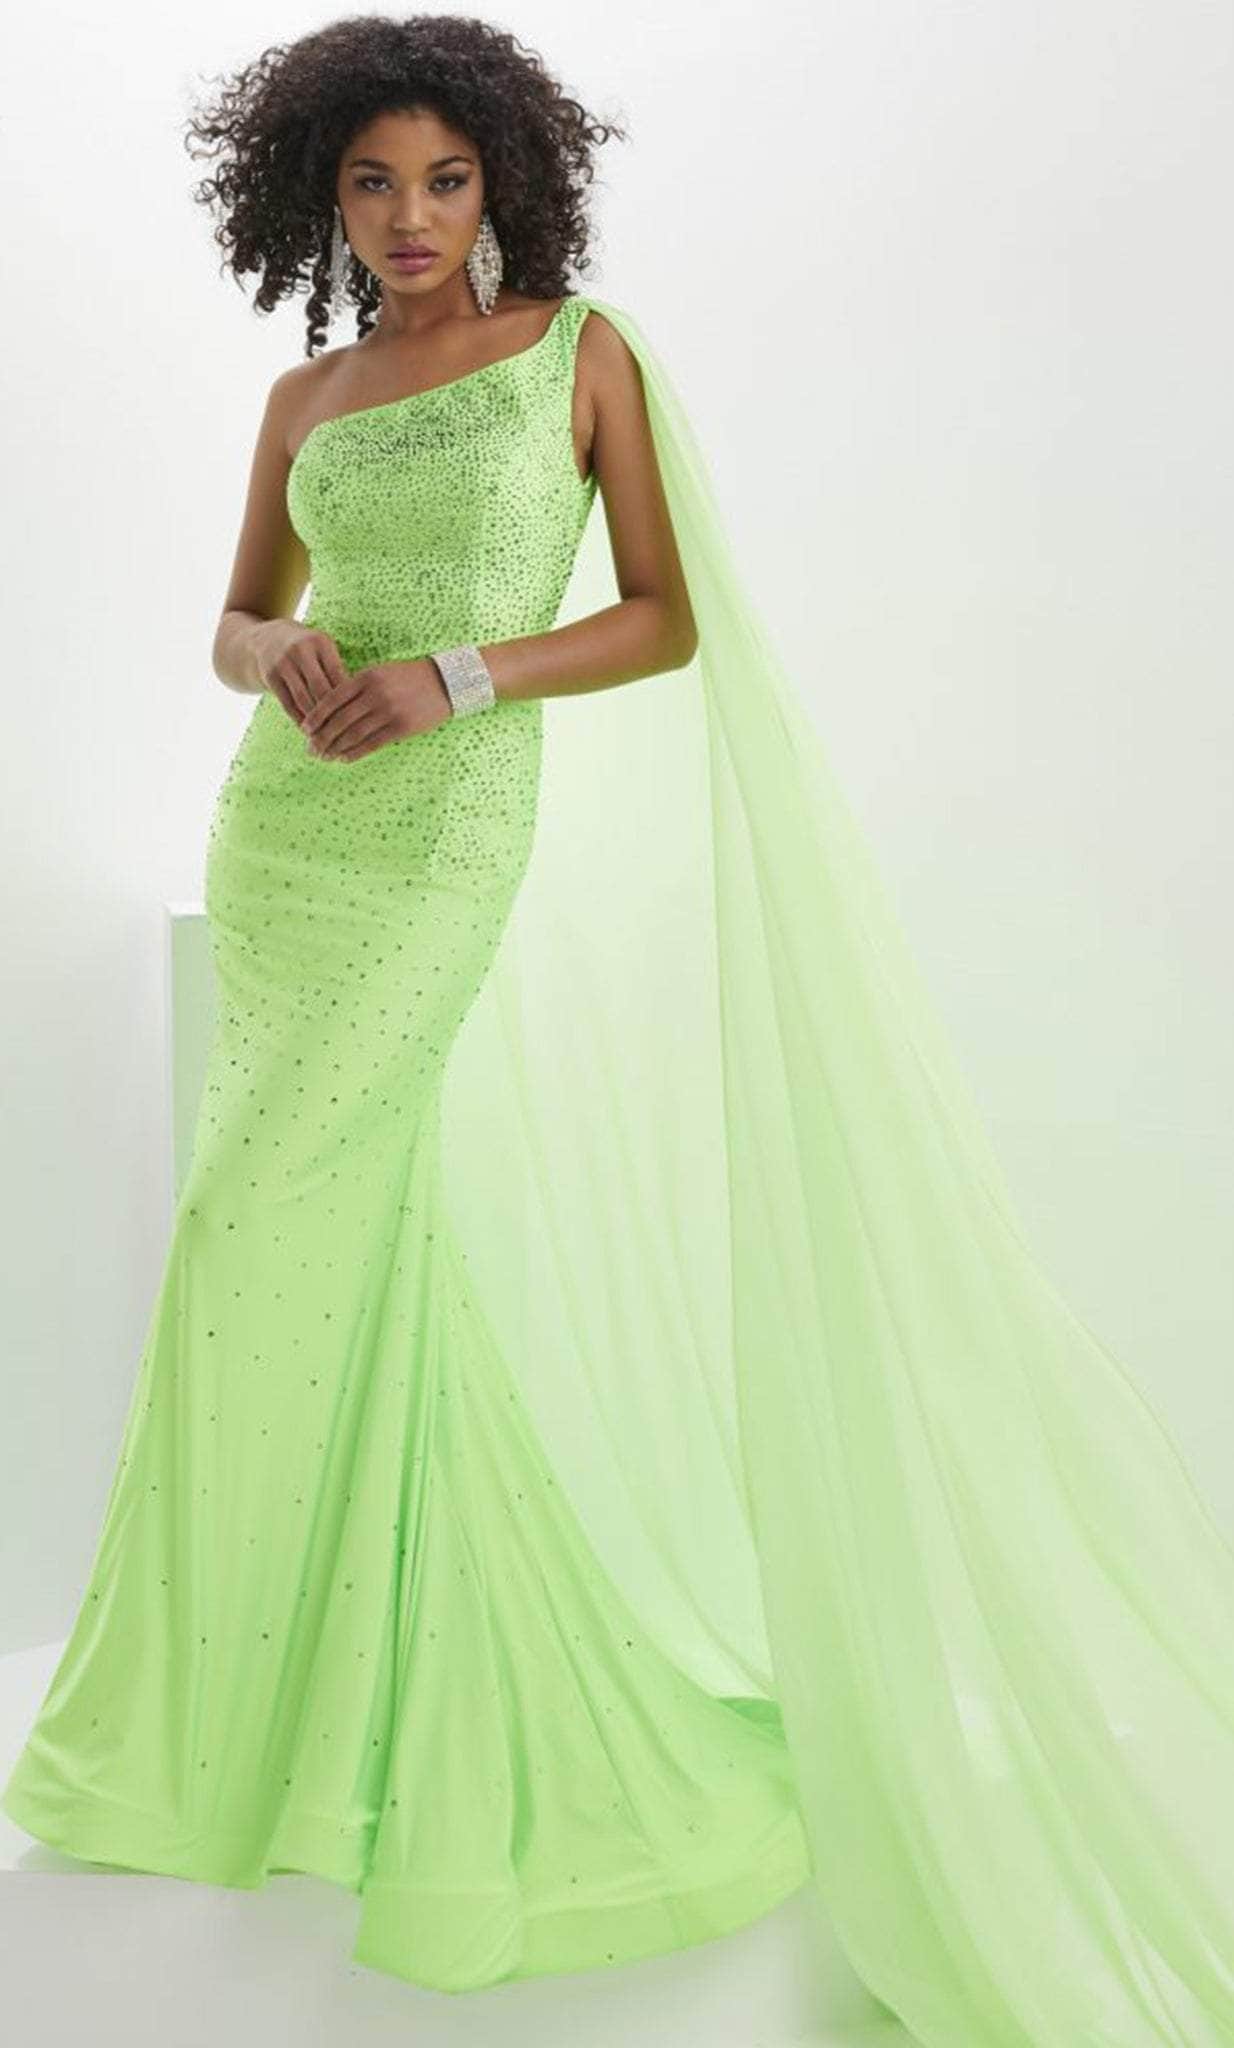 Image of Panoply 14135 - One Shoulder Evening Gown With Cape